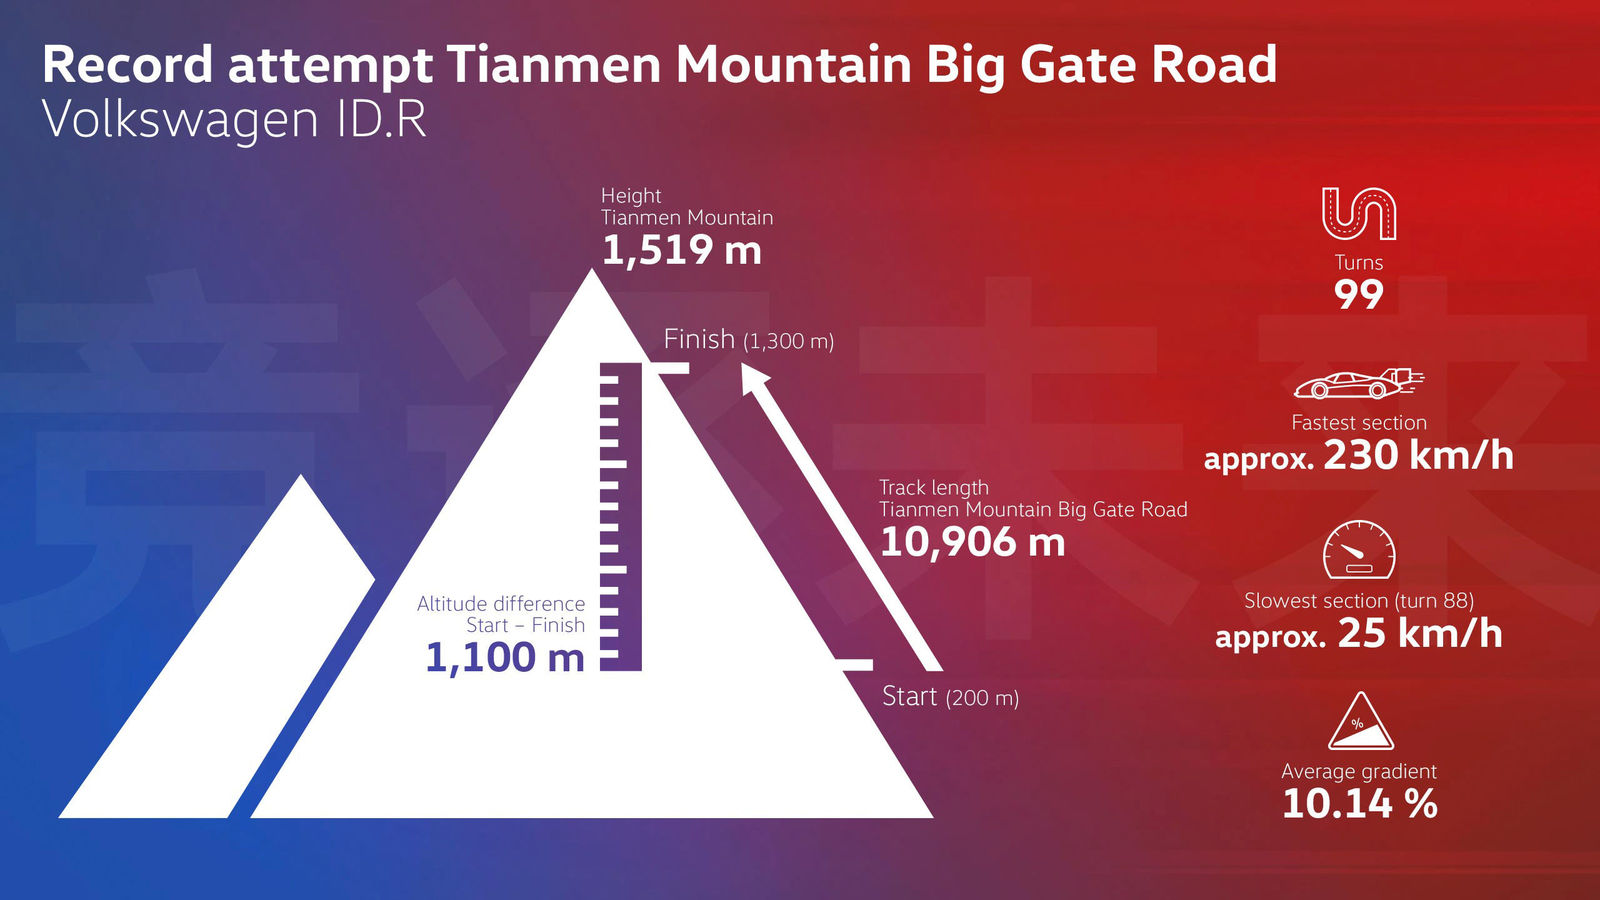 Storming the summit for e-mobility: Volkswagen targets record on Tianmen Mountain